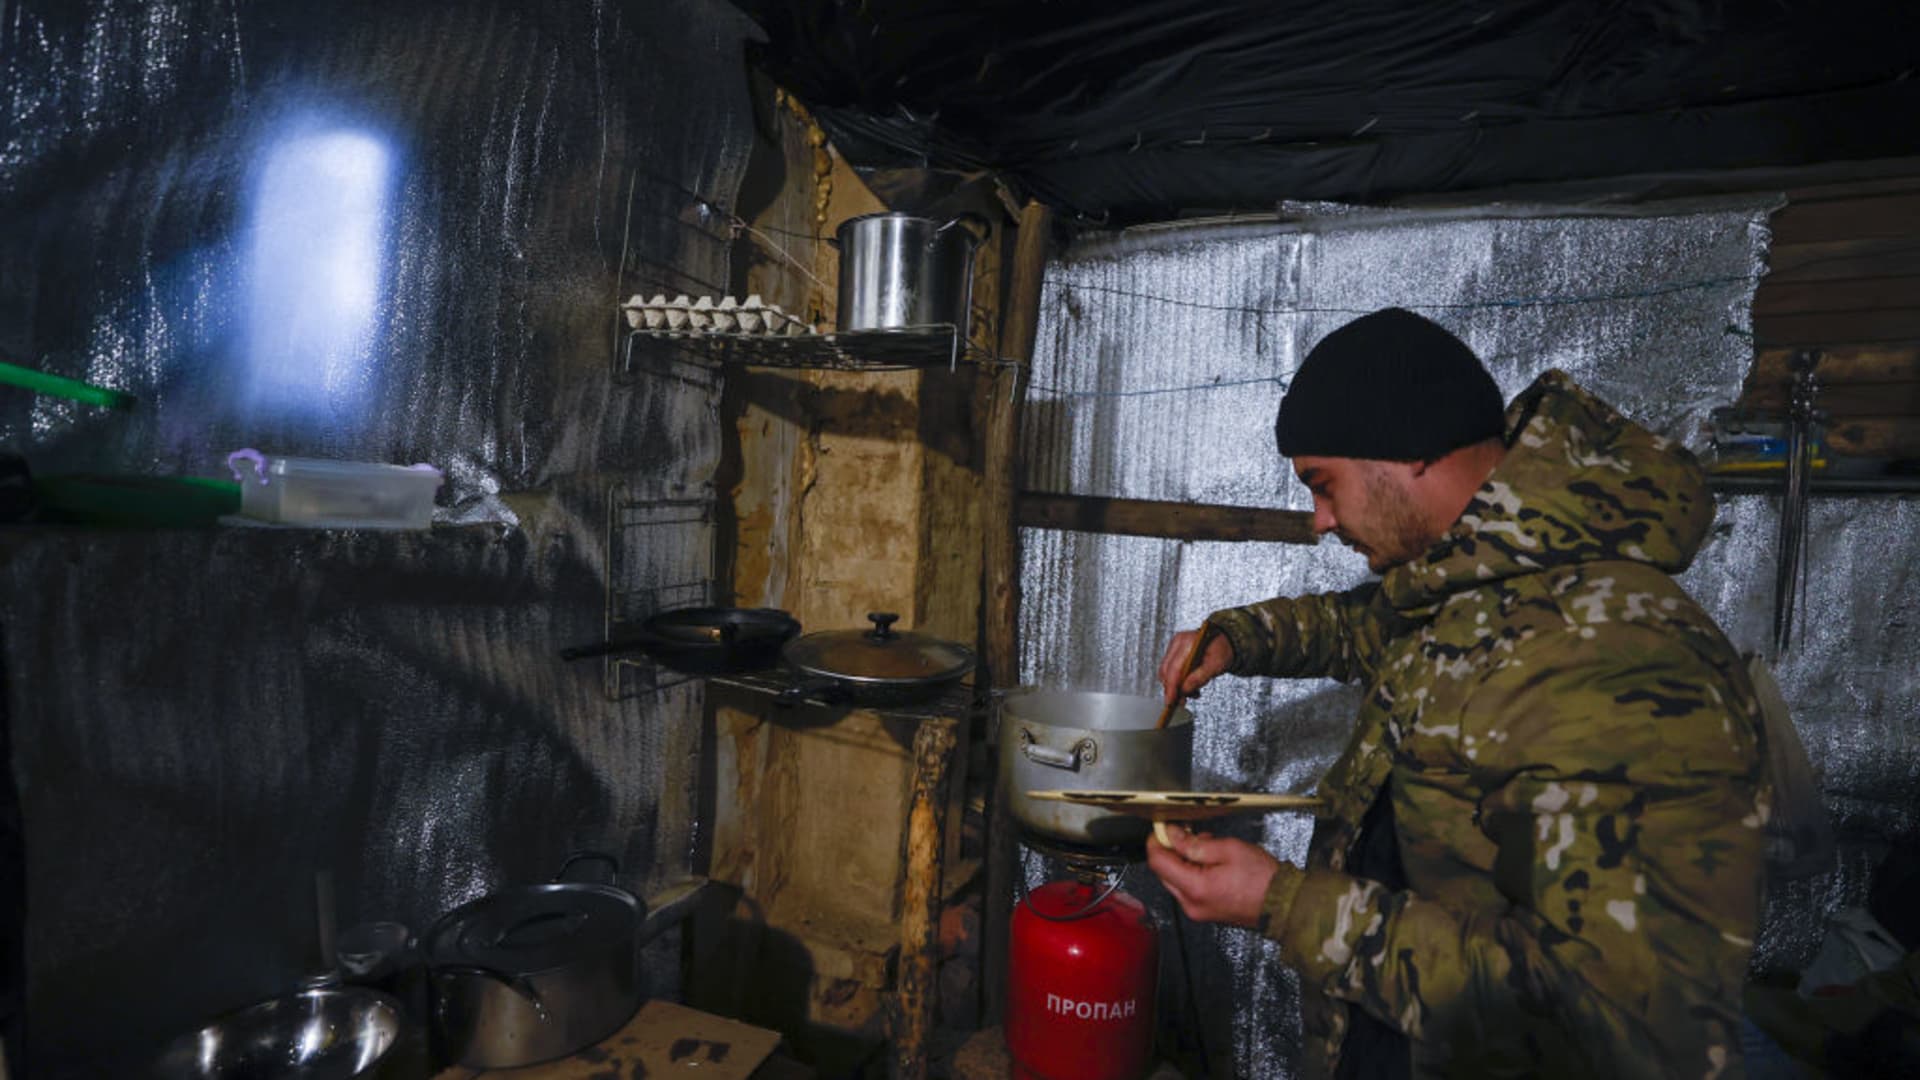 Soldiers stationed at the front of the 59th cavalry of the Ukrainian Army, who spent their time outside of their duties in the shelter, are viewed in Donetsk Oblast, Ukraine on Feb 27, 2023.